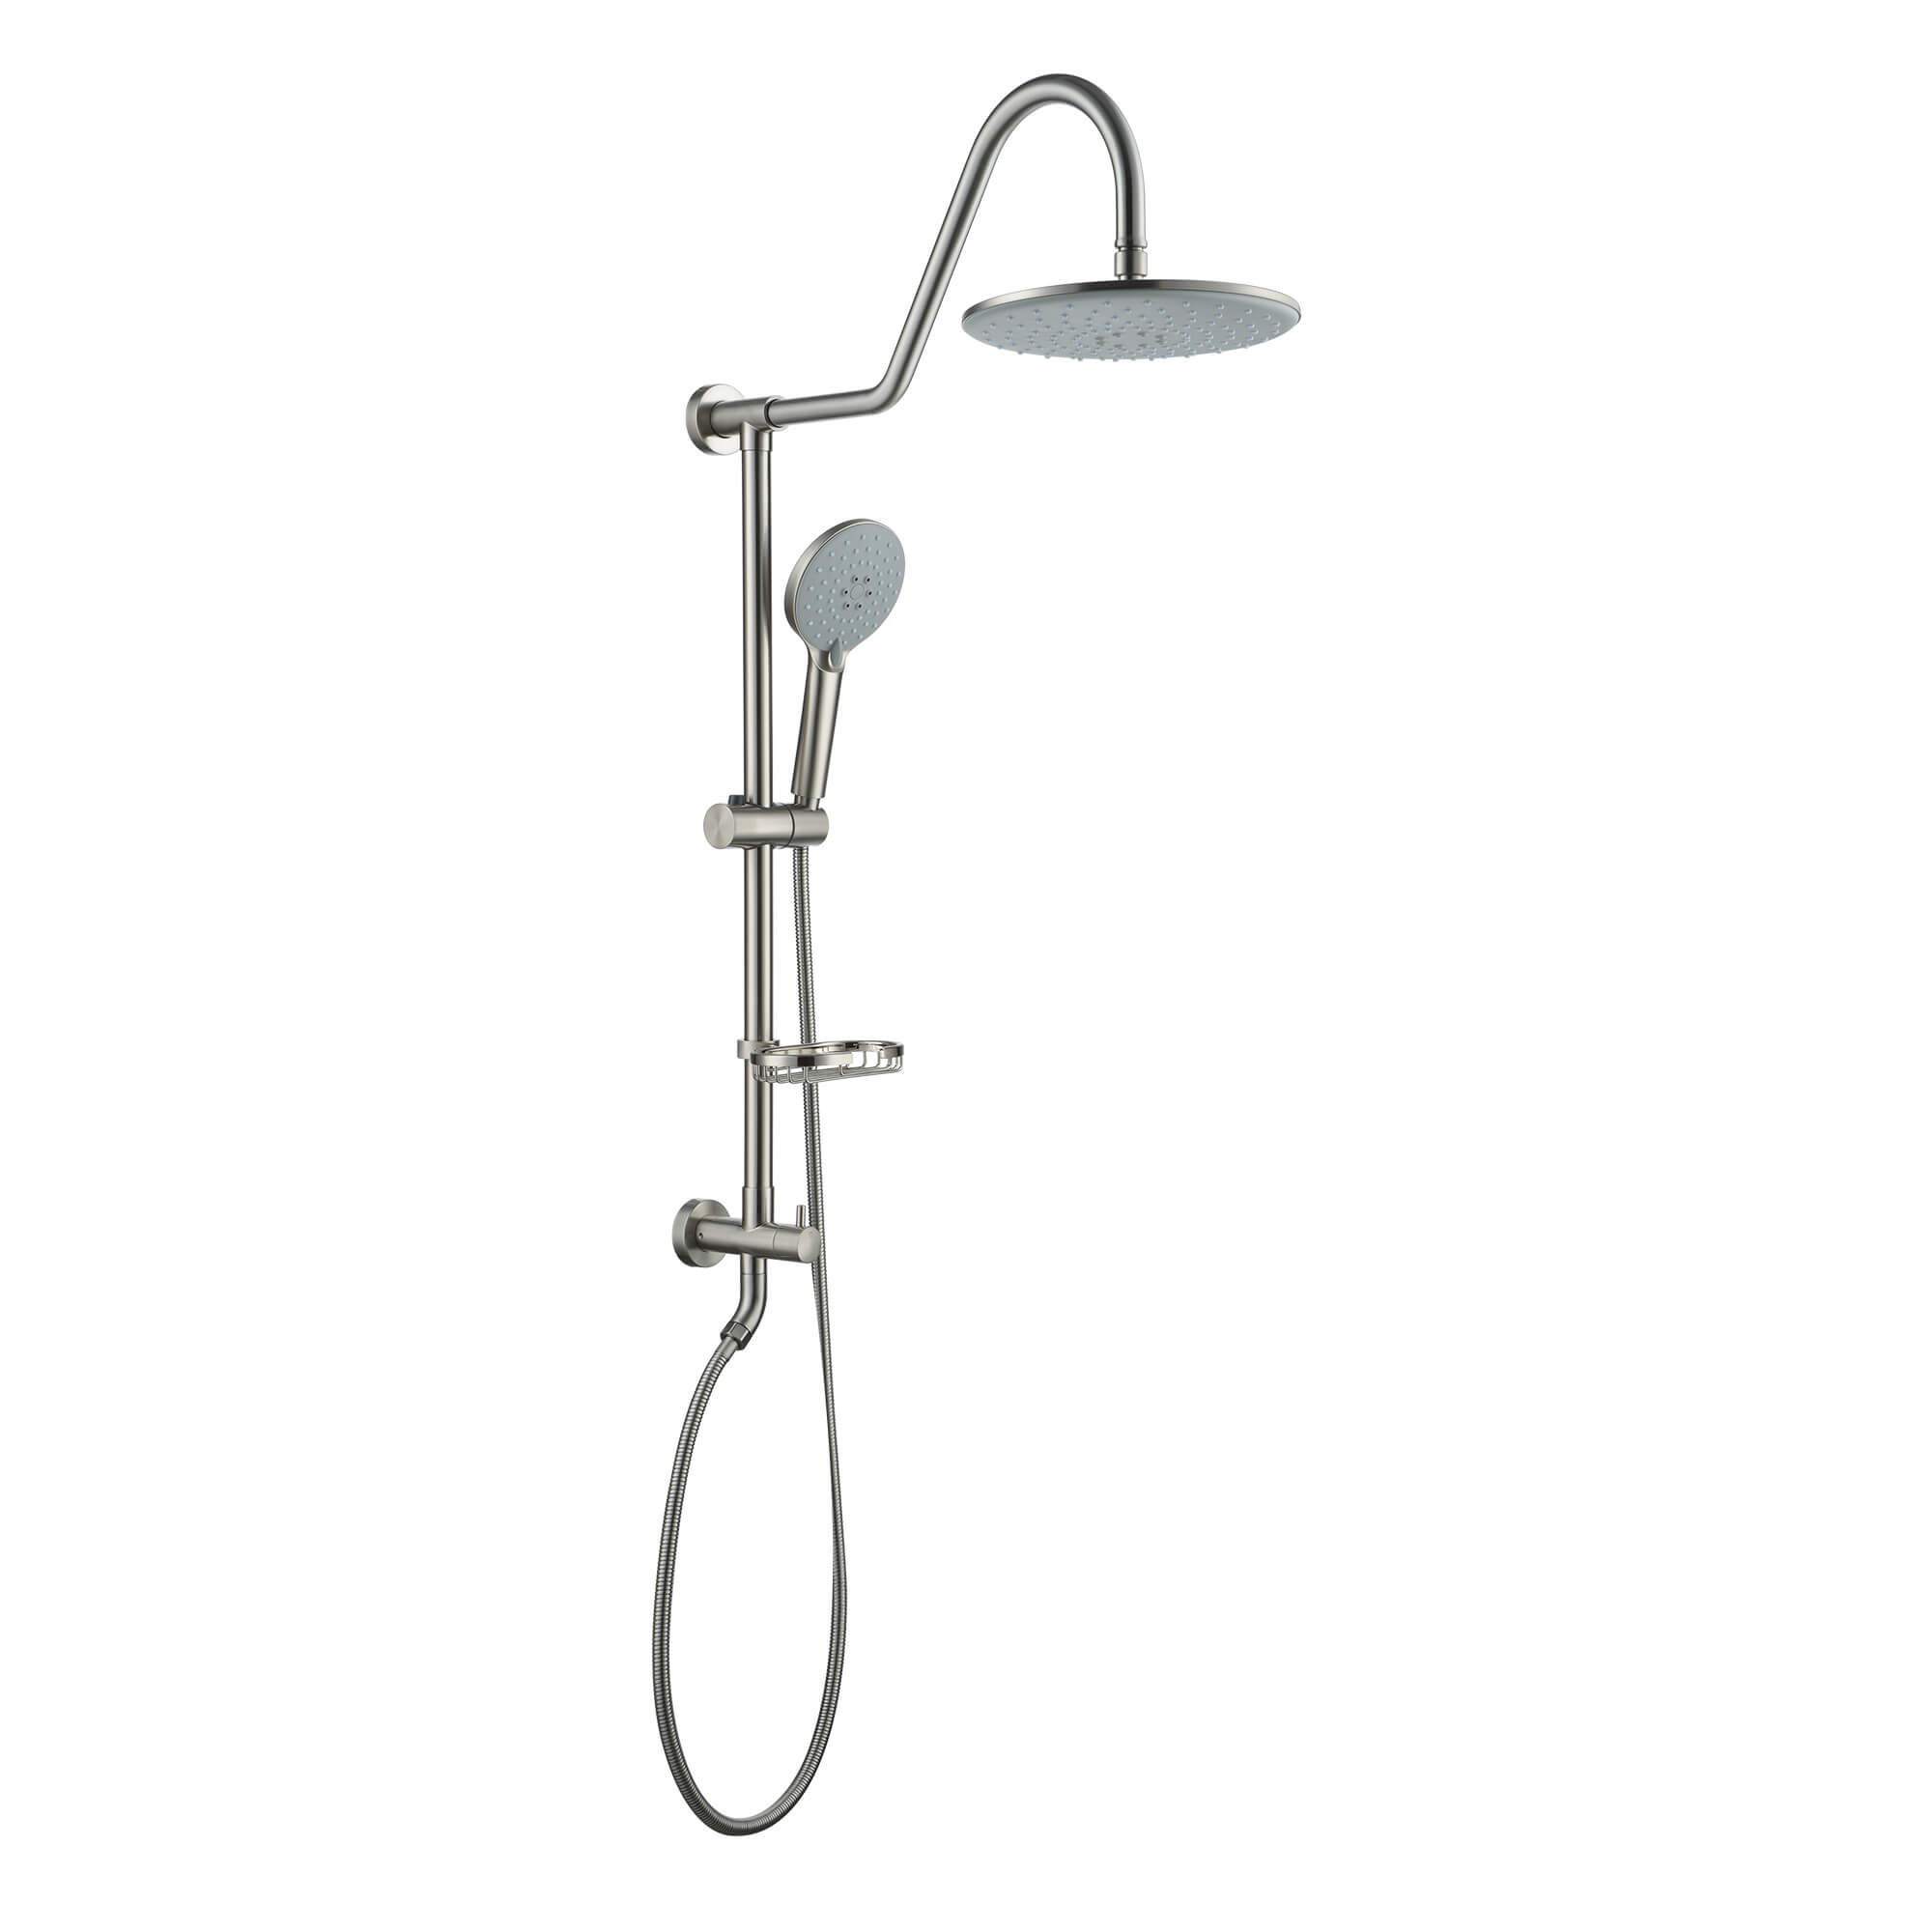 Casainc Exposed Pipe Dual Shower Heads System with 3 Spray Patterns Hand Shower for Different Types Bathroom Size